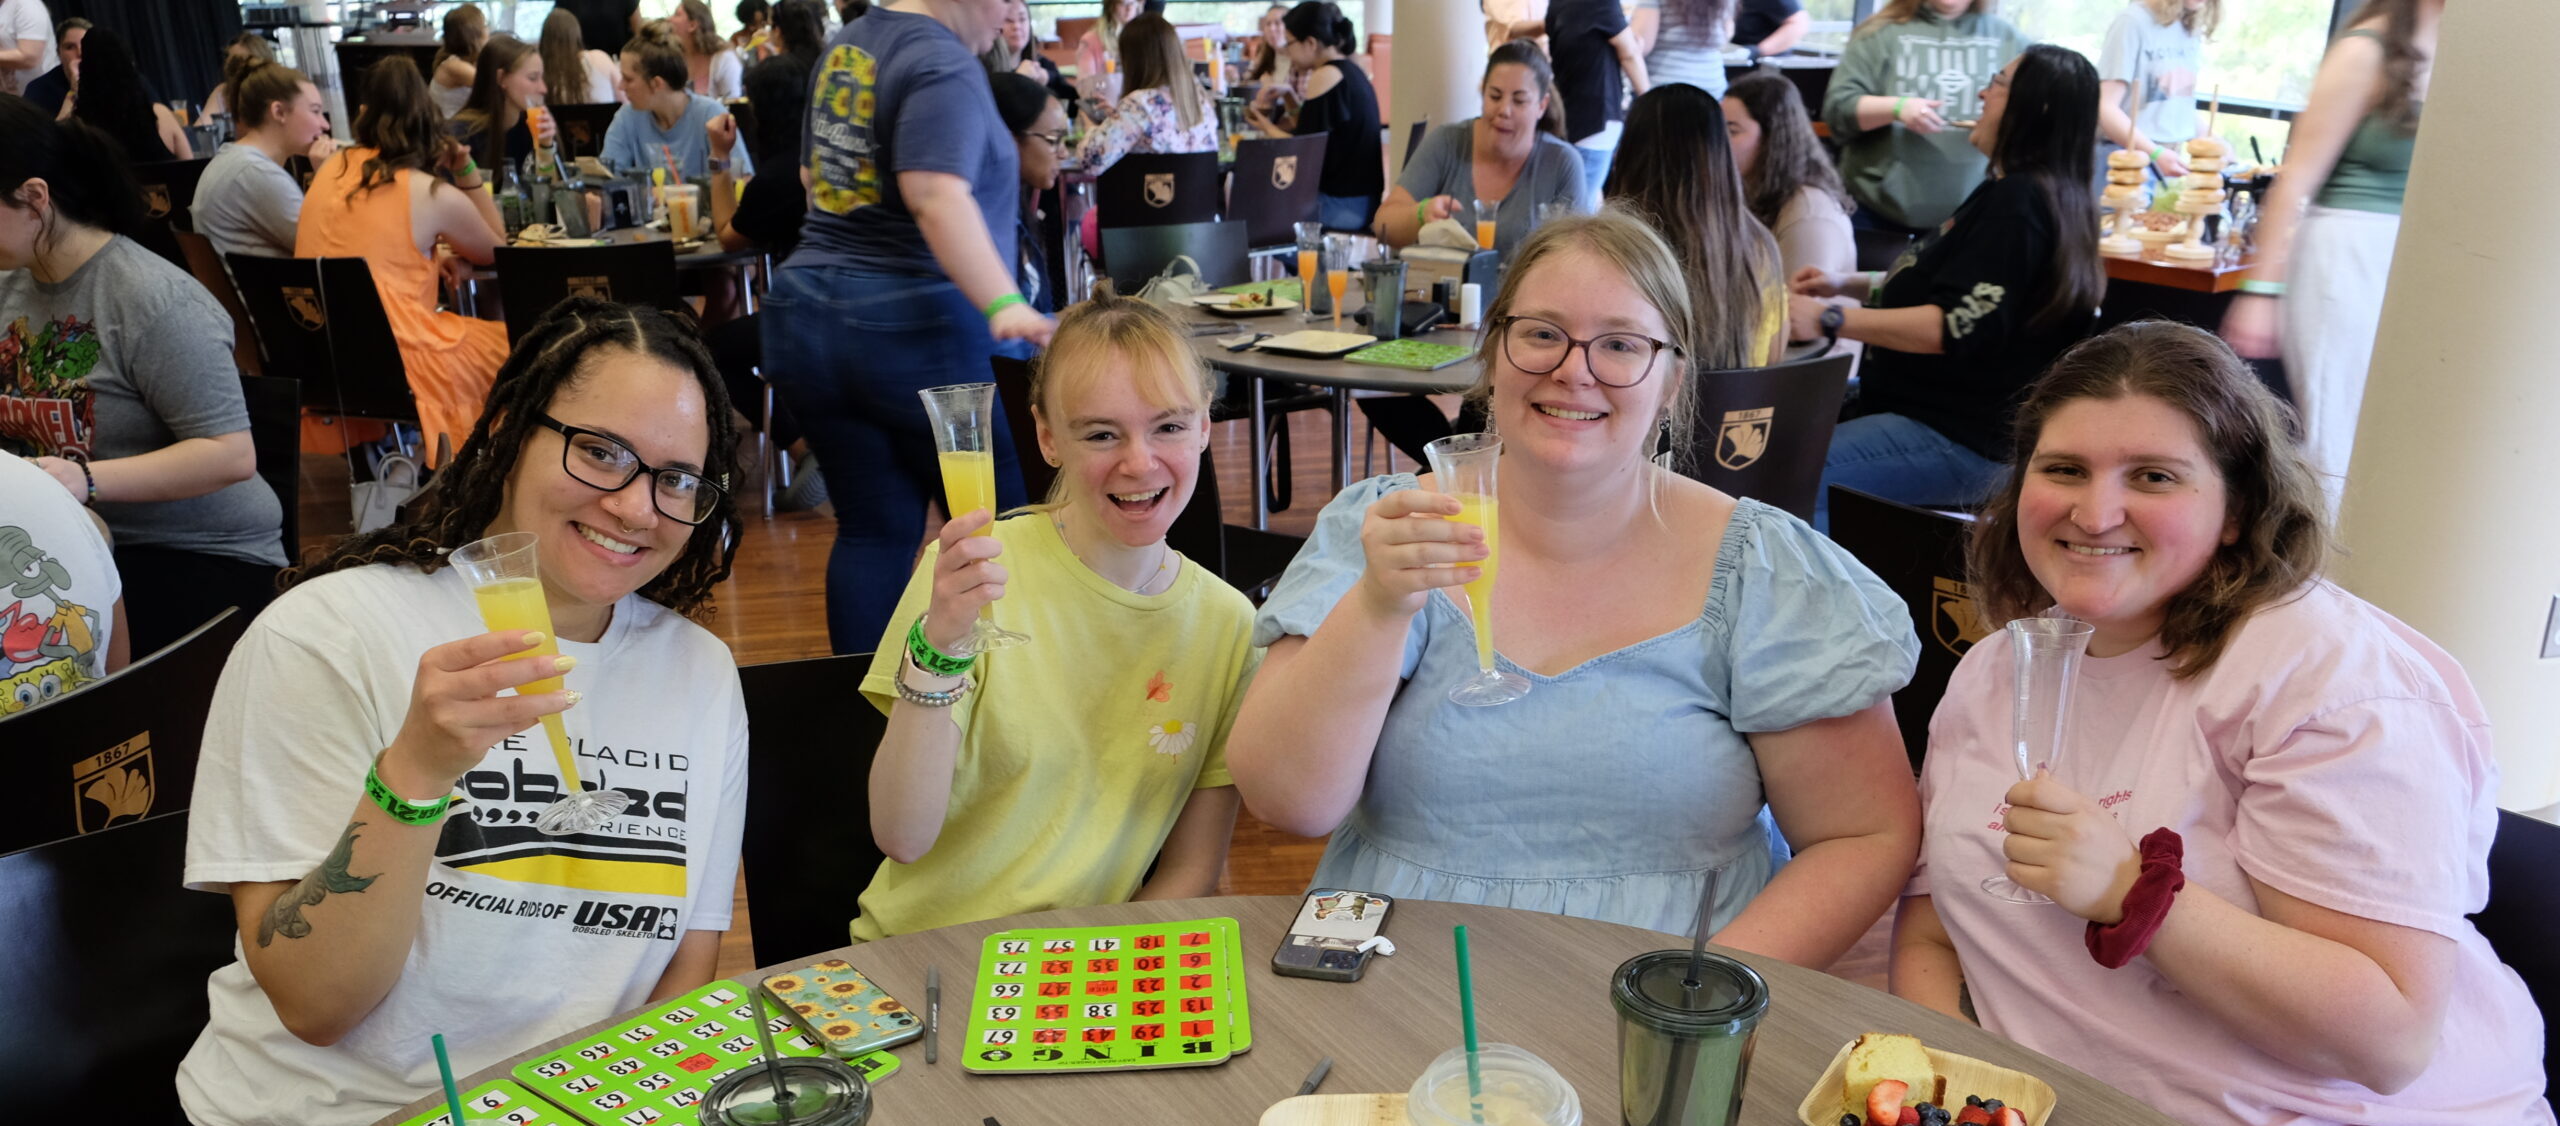 Several students sit around a table with bingo boards and food in front of them, smiles on their faces as they raise their drinks